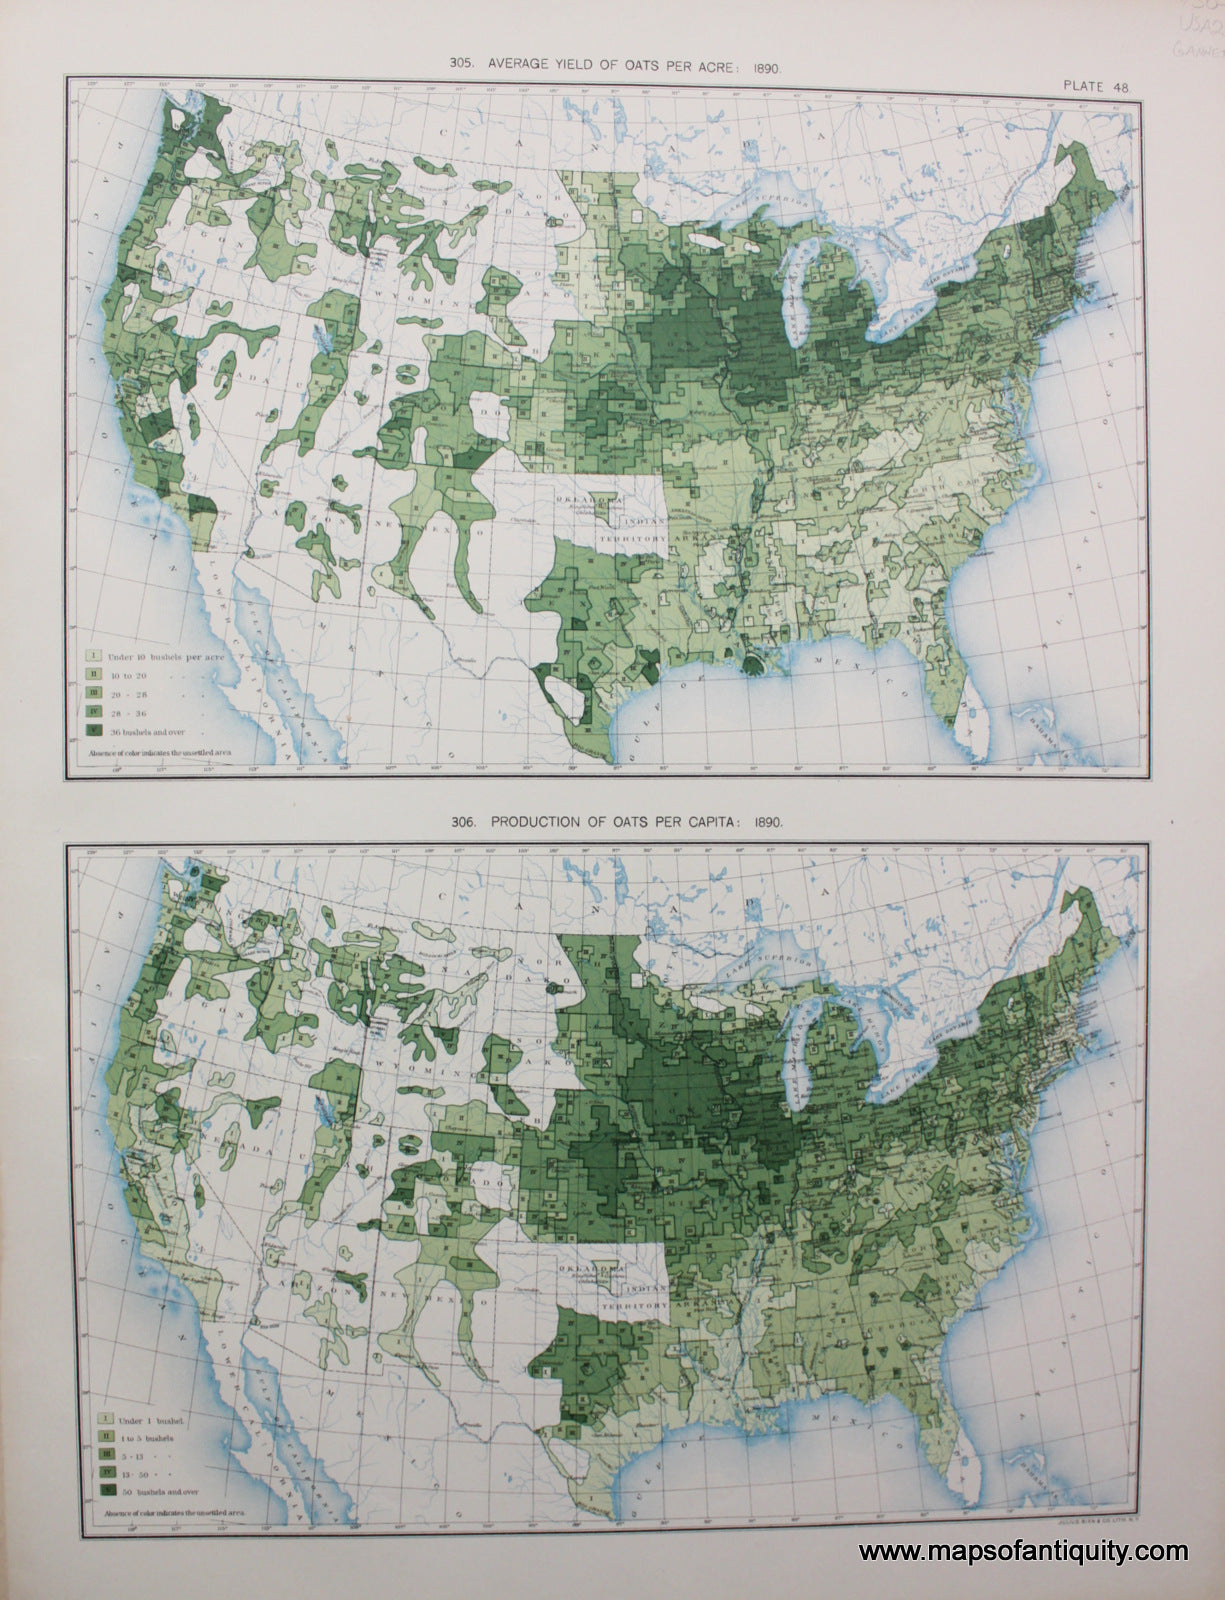 Antique-Printed-Color-Map-Average-Yield-of-Oats-Per-Acre:-1890/-Production-of-Oats-Per-Capita:-1890-United-States-United-States-General-1898-Gannett-Maps-Of-Antiquity